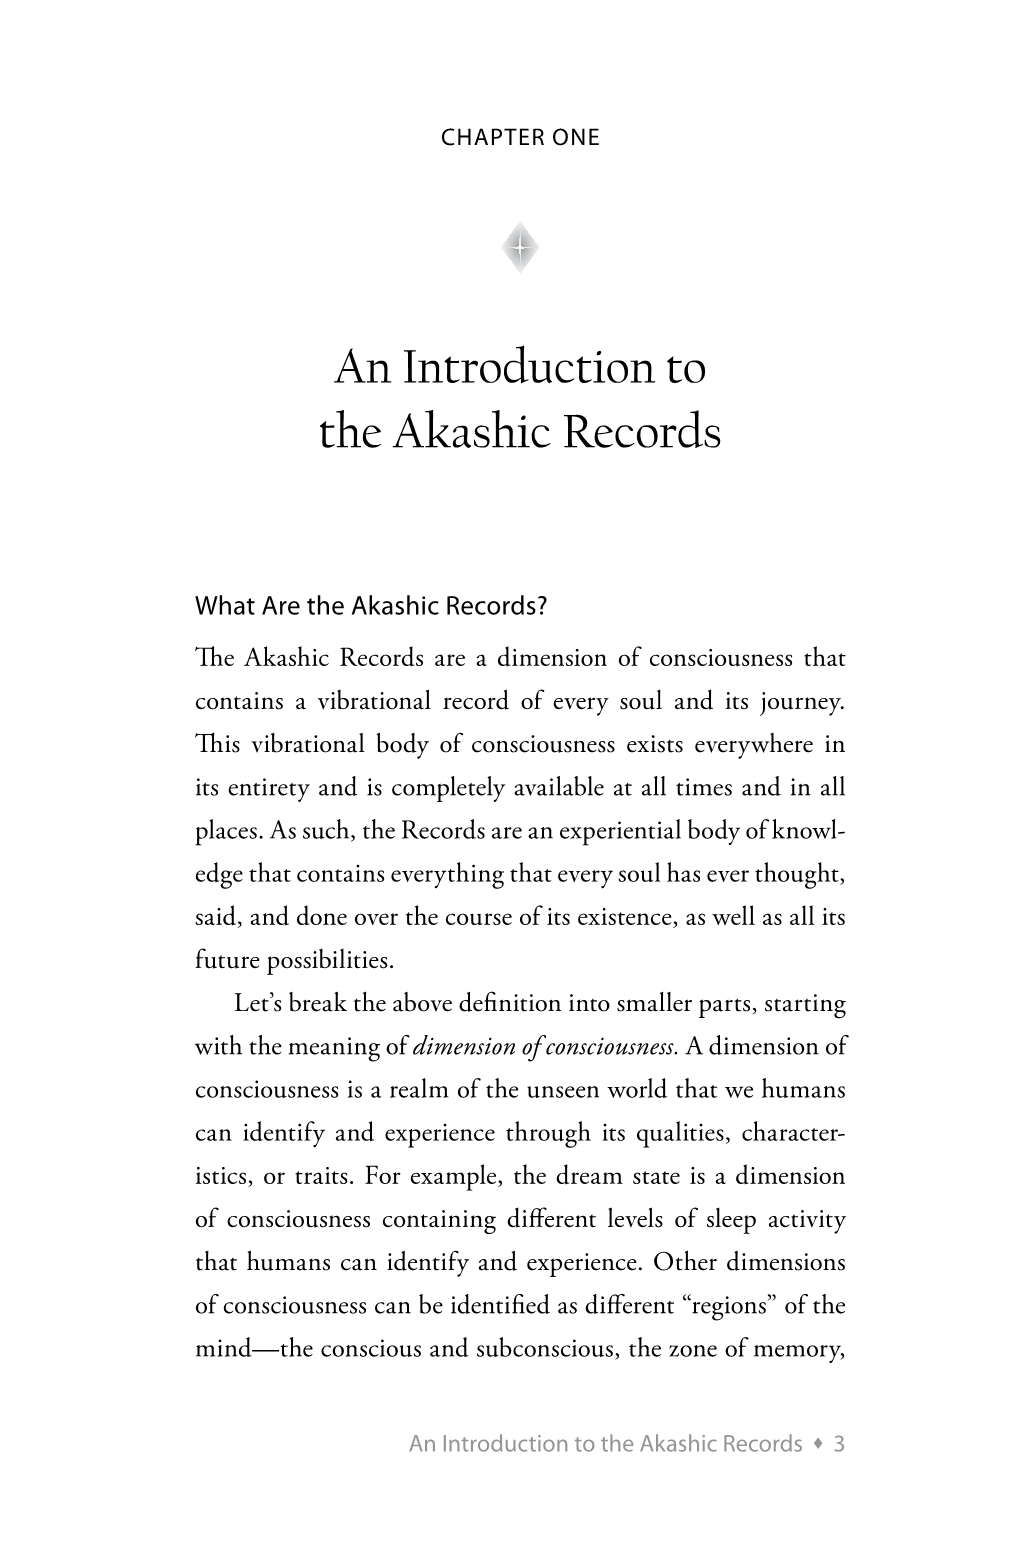 An Introduction to the Akashic Records